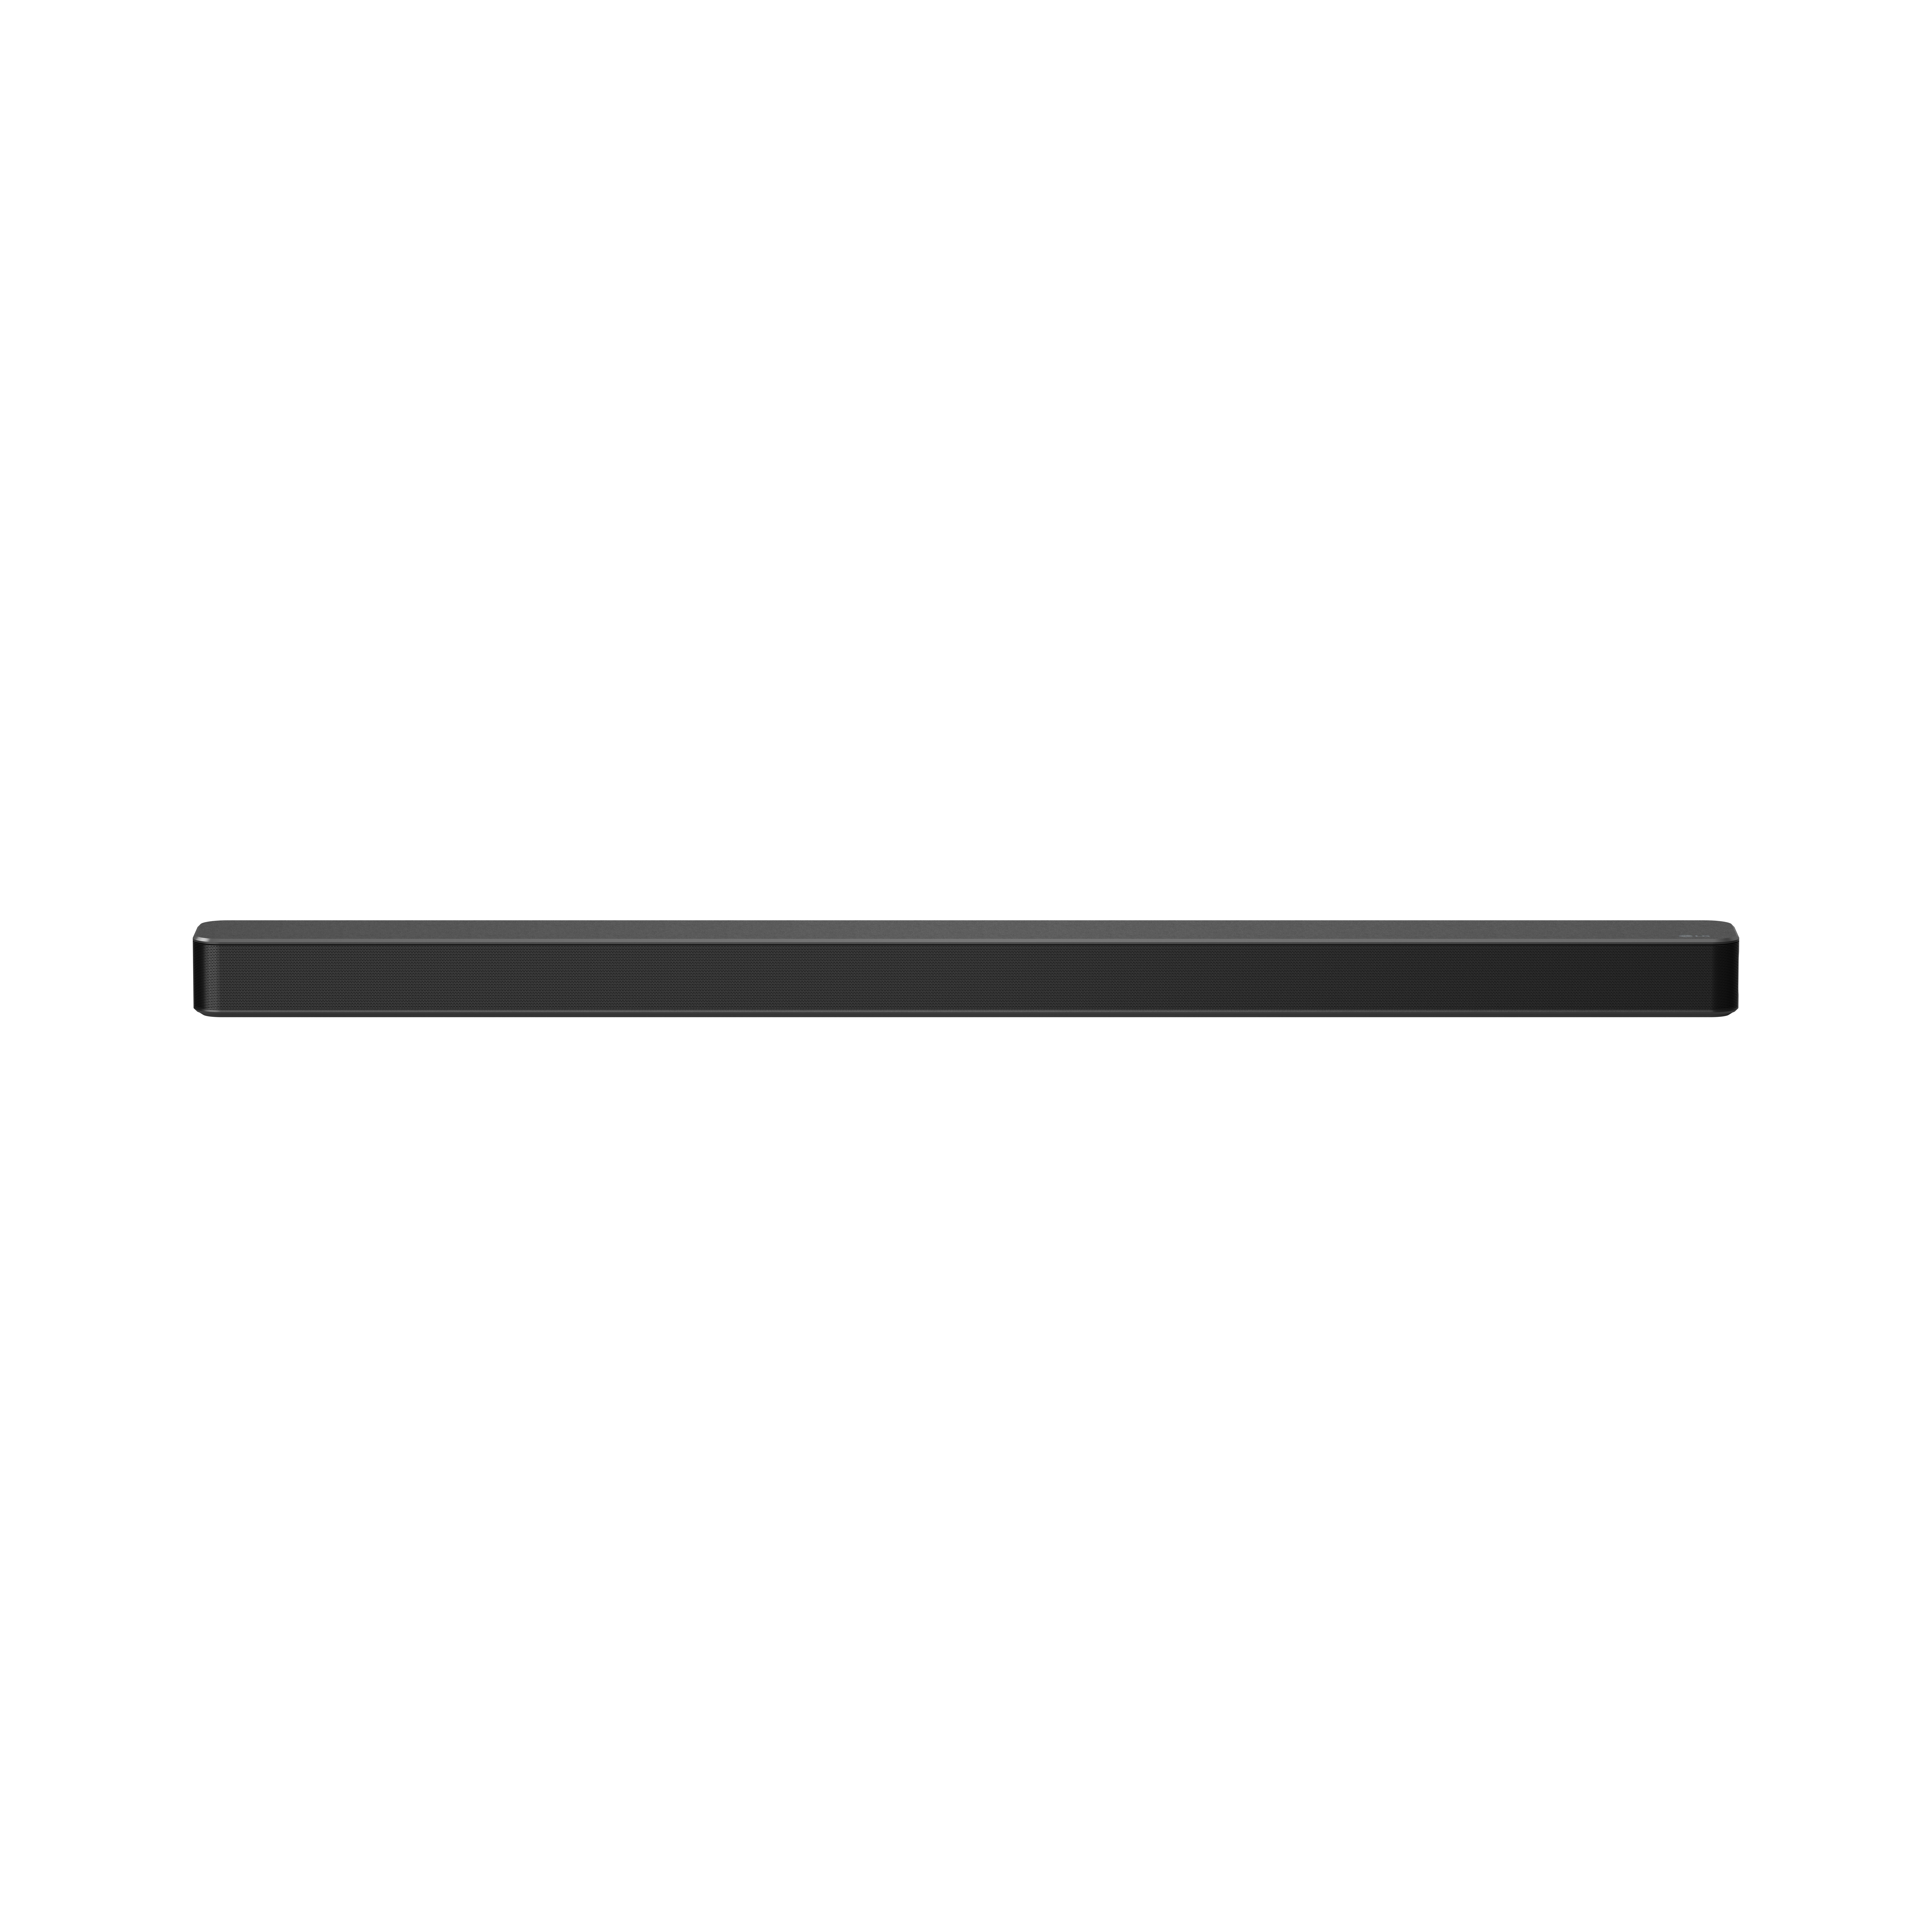 LG 3.1 Channel High Res Audio Sound Bar with DTS Virtual:X - SN6Y - image 2 of 19